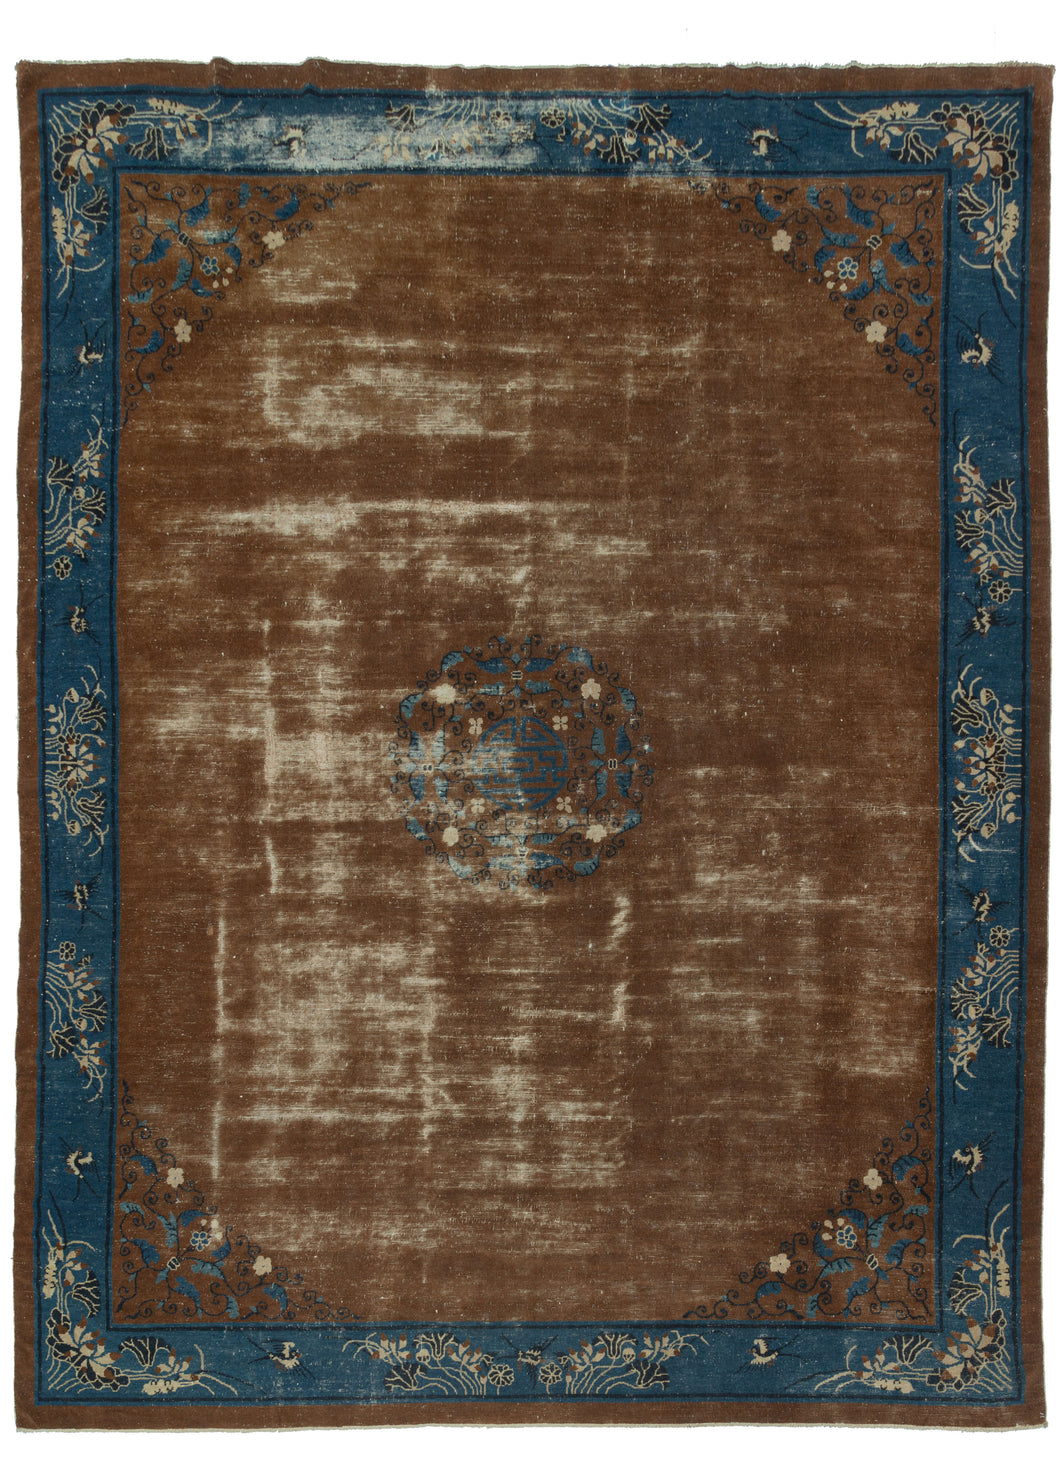 Antique Chinese Peking rug featuring an expansive chocolate ground worn in many areas to the white cotton foundation. A central medallion is composed of a coin motif surrounded by scrolling vines in black, blue, and white. The same scrolled vines can be seen in each cornice of the otherwise unadorned field. A lively blue main border showcasing flying birds and blooming flowers that almost appear to sway with the wind. 